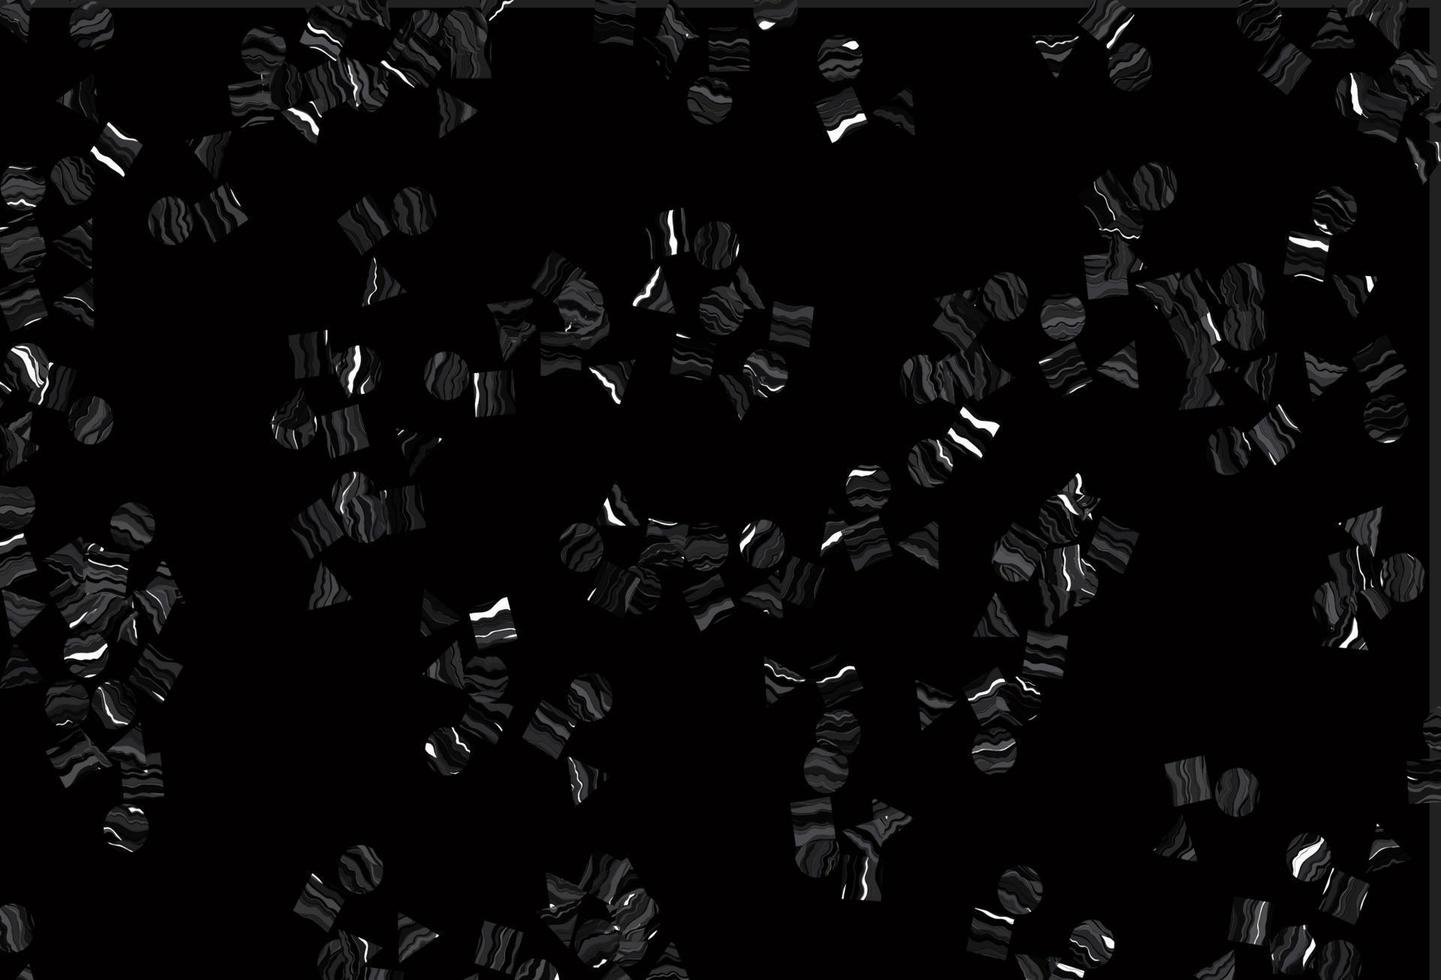 Light Black vector texture in poly style with circles, cubes.